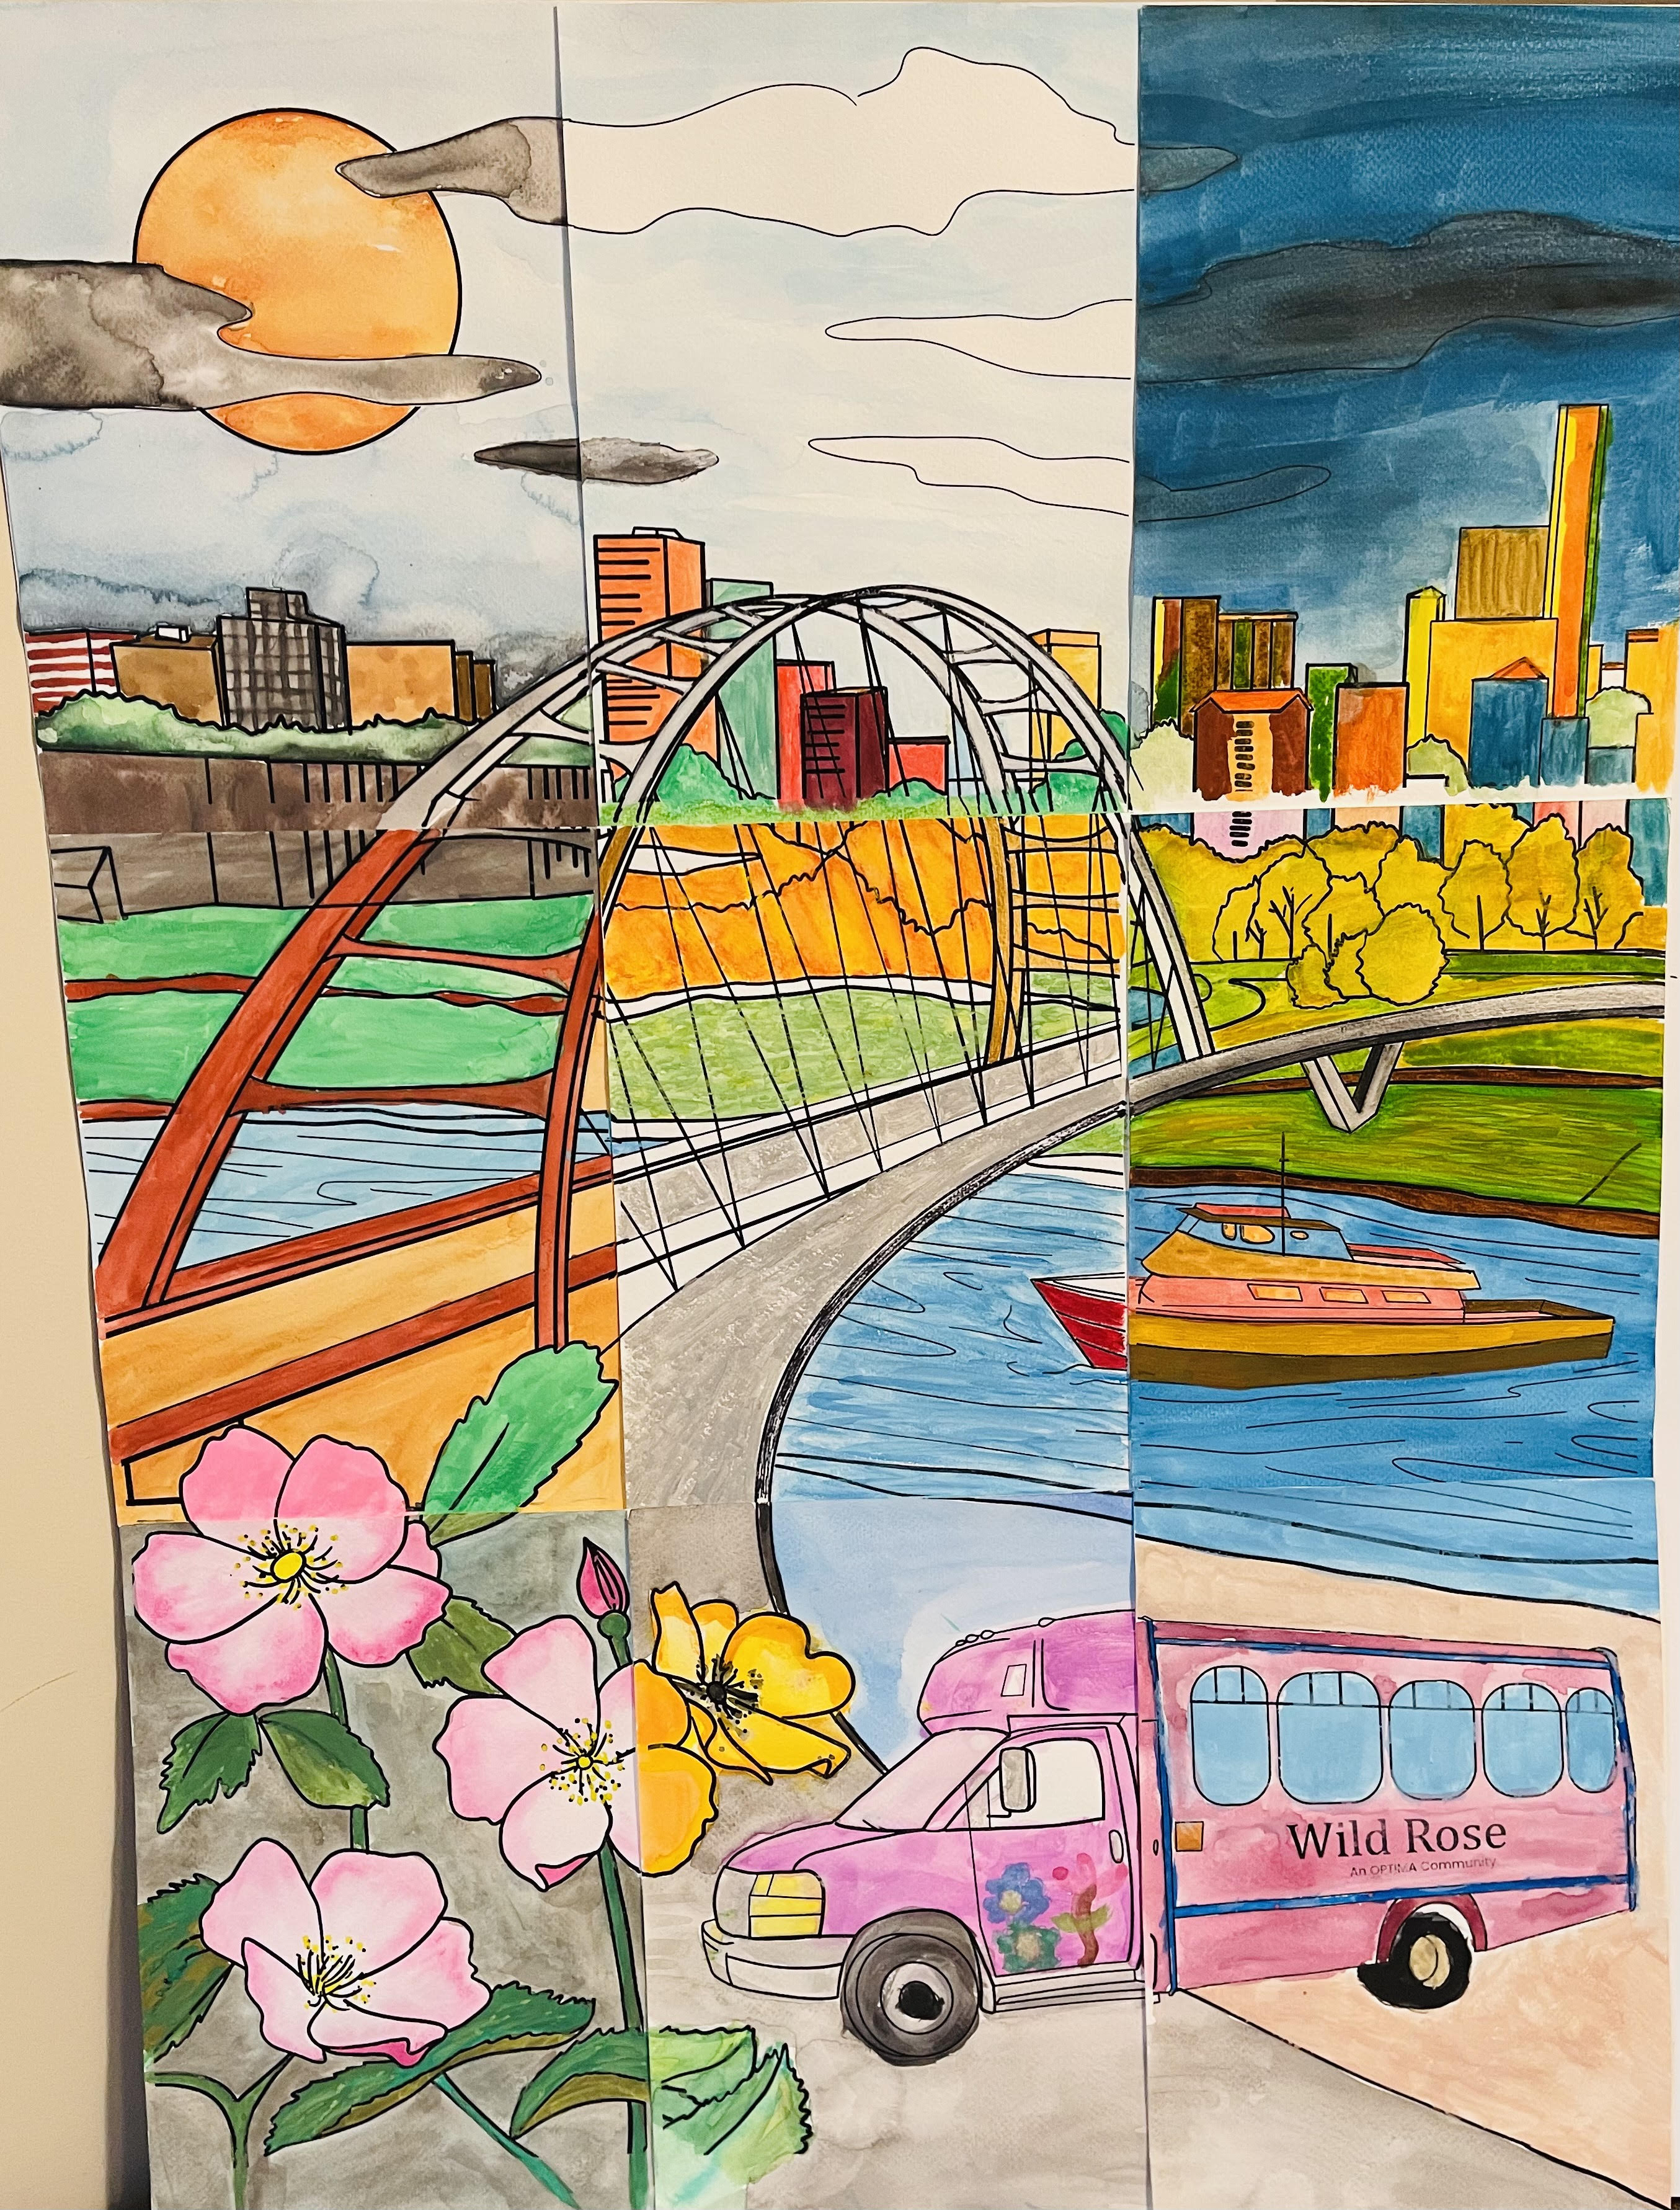 Painting made by Optima Living Community Wild Rose residents participating in the Artfull Enrichment program